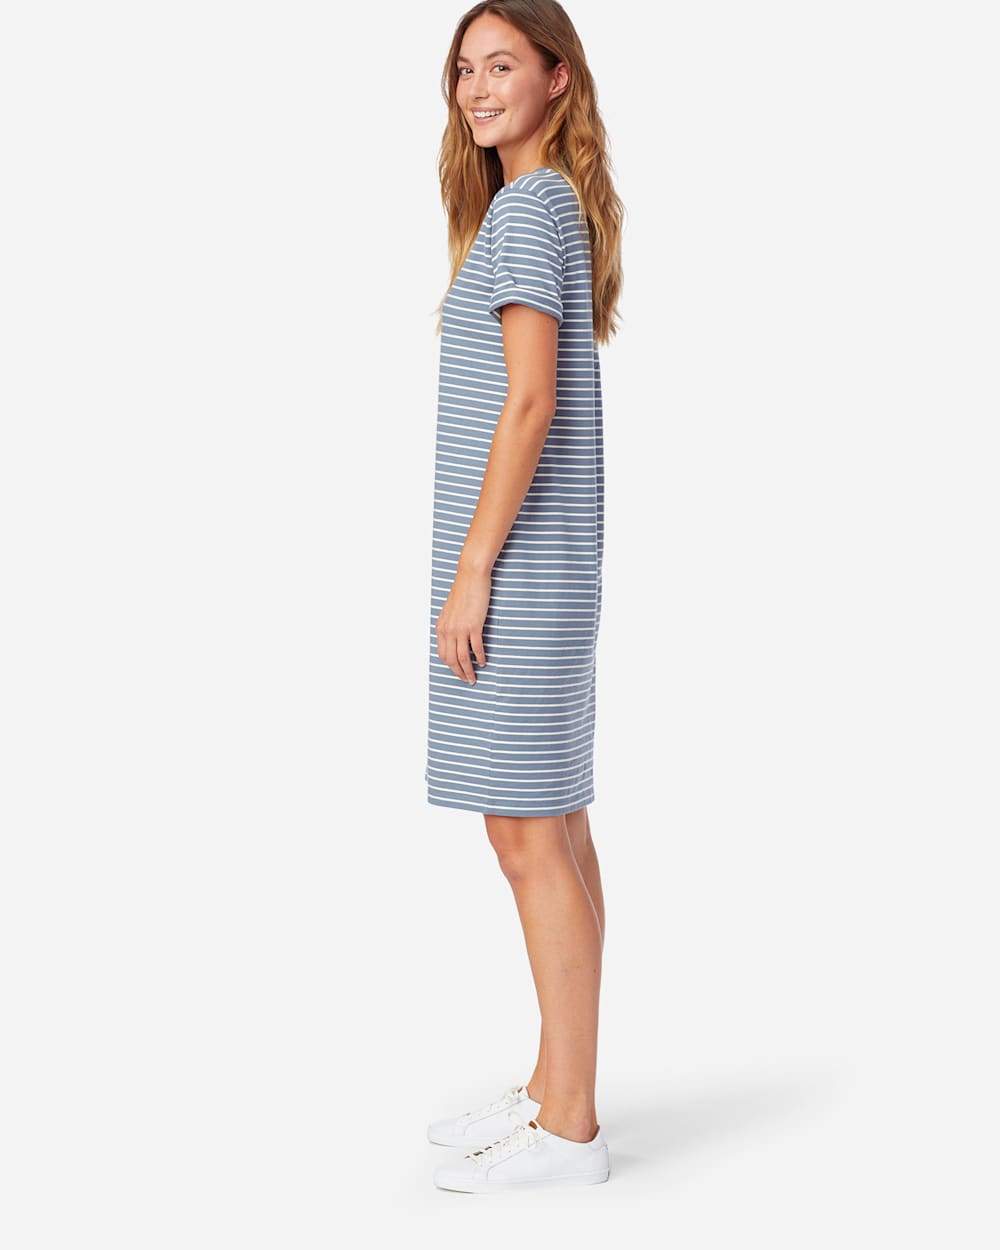 ALTERNATE VIEW OF DESCHUTES STRIPE TEE DRESS IN FADED BLUE/ANTIQUE WHITE image number 2